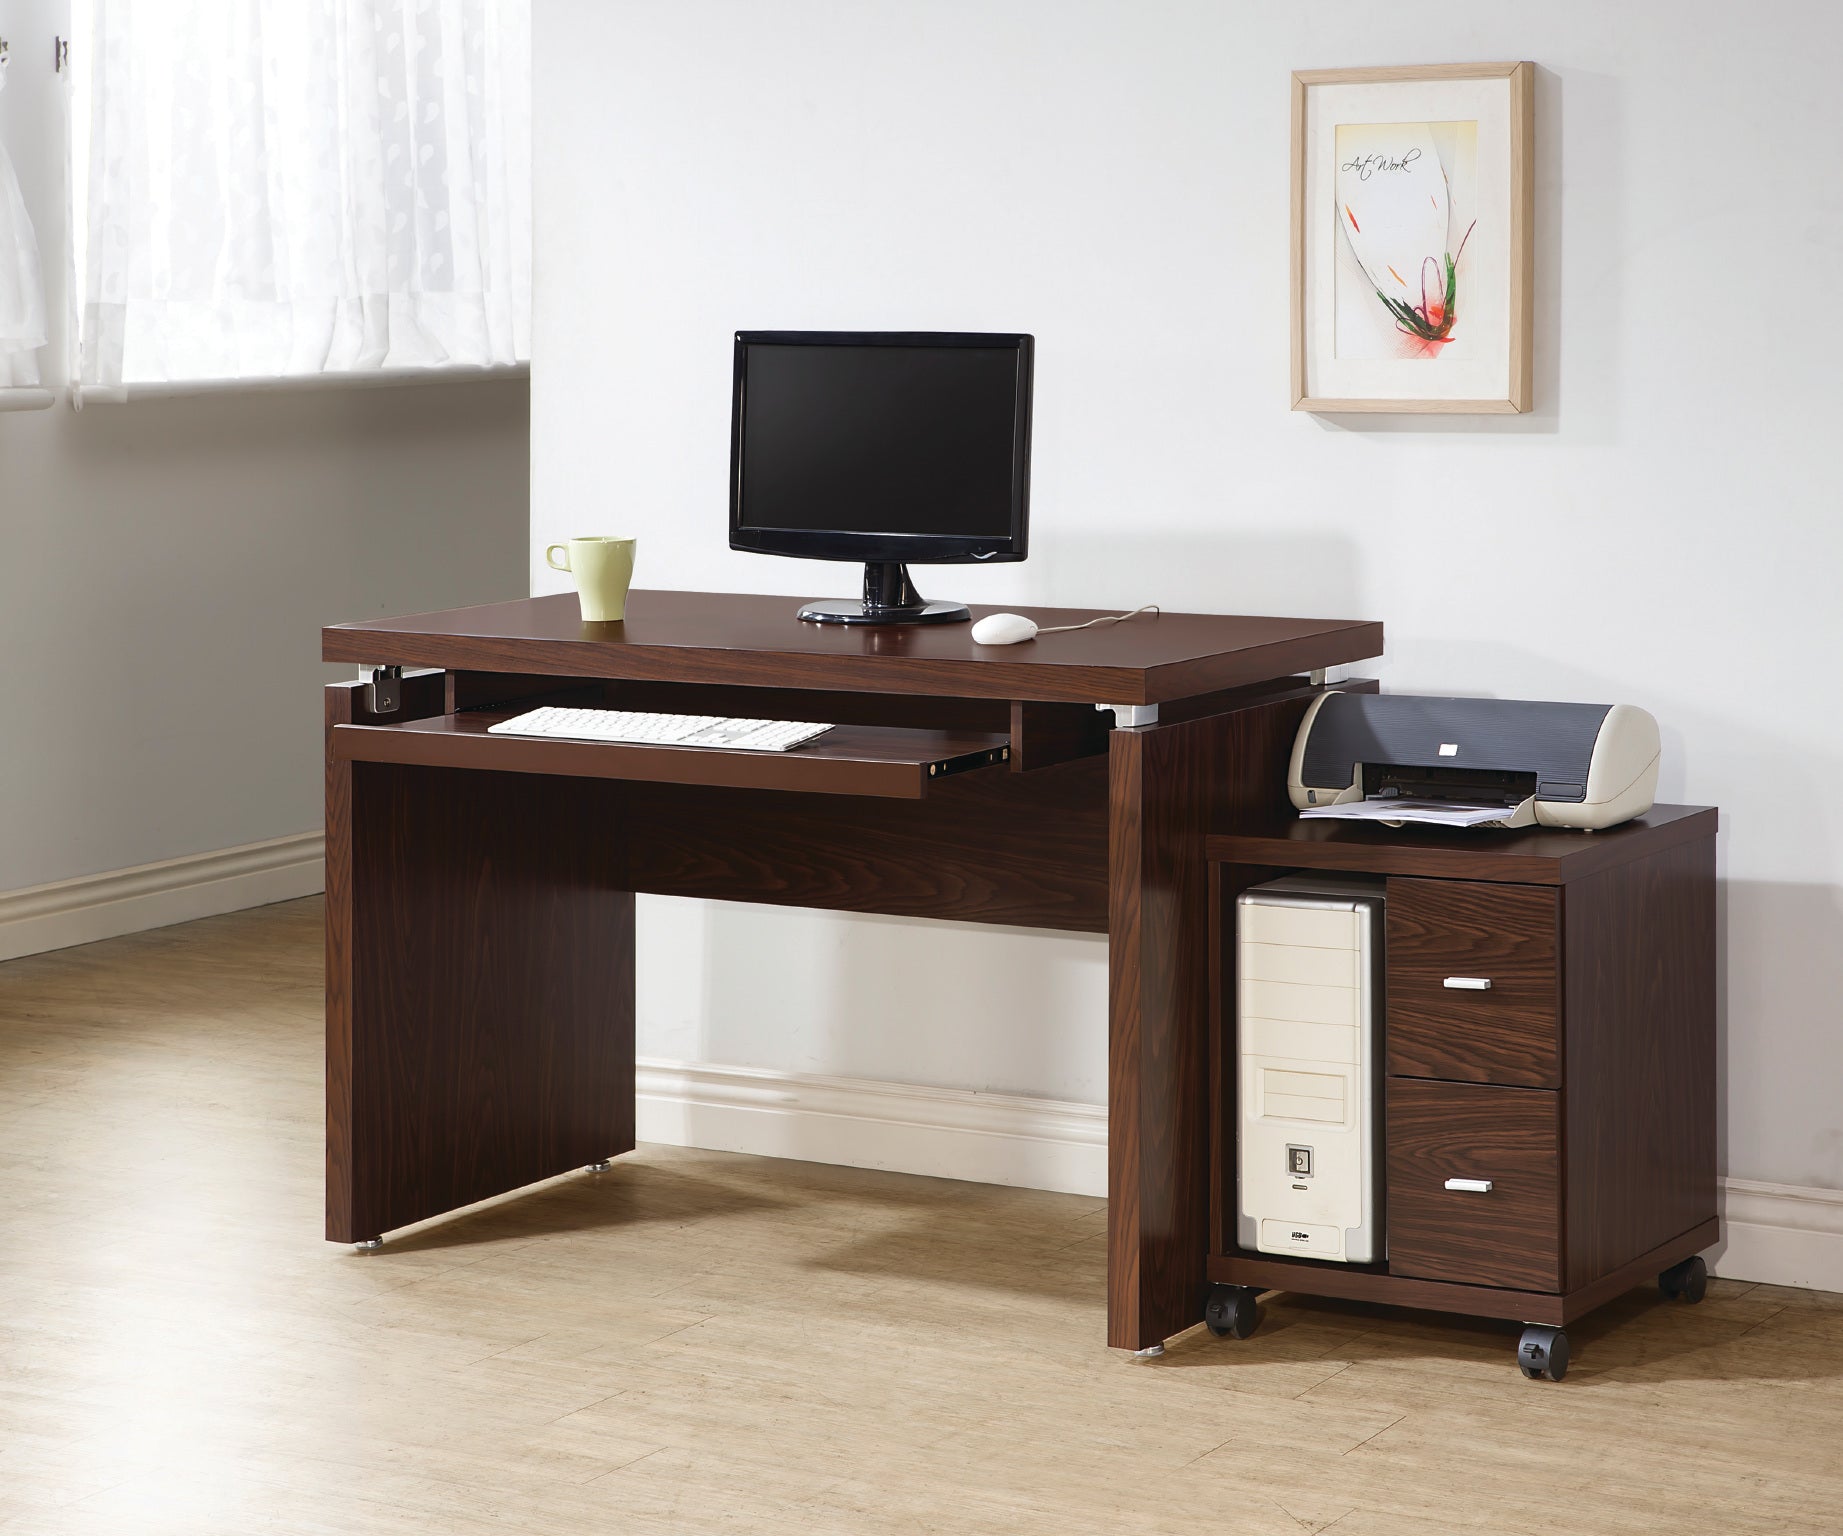 OF6387 - Office Desk and Mobile CPU Stand